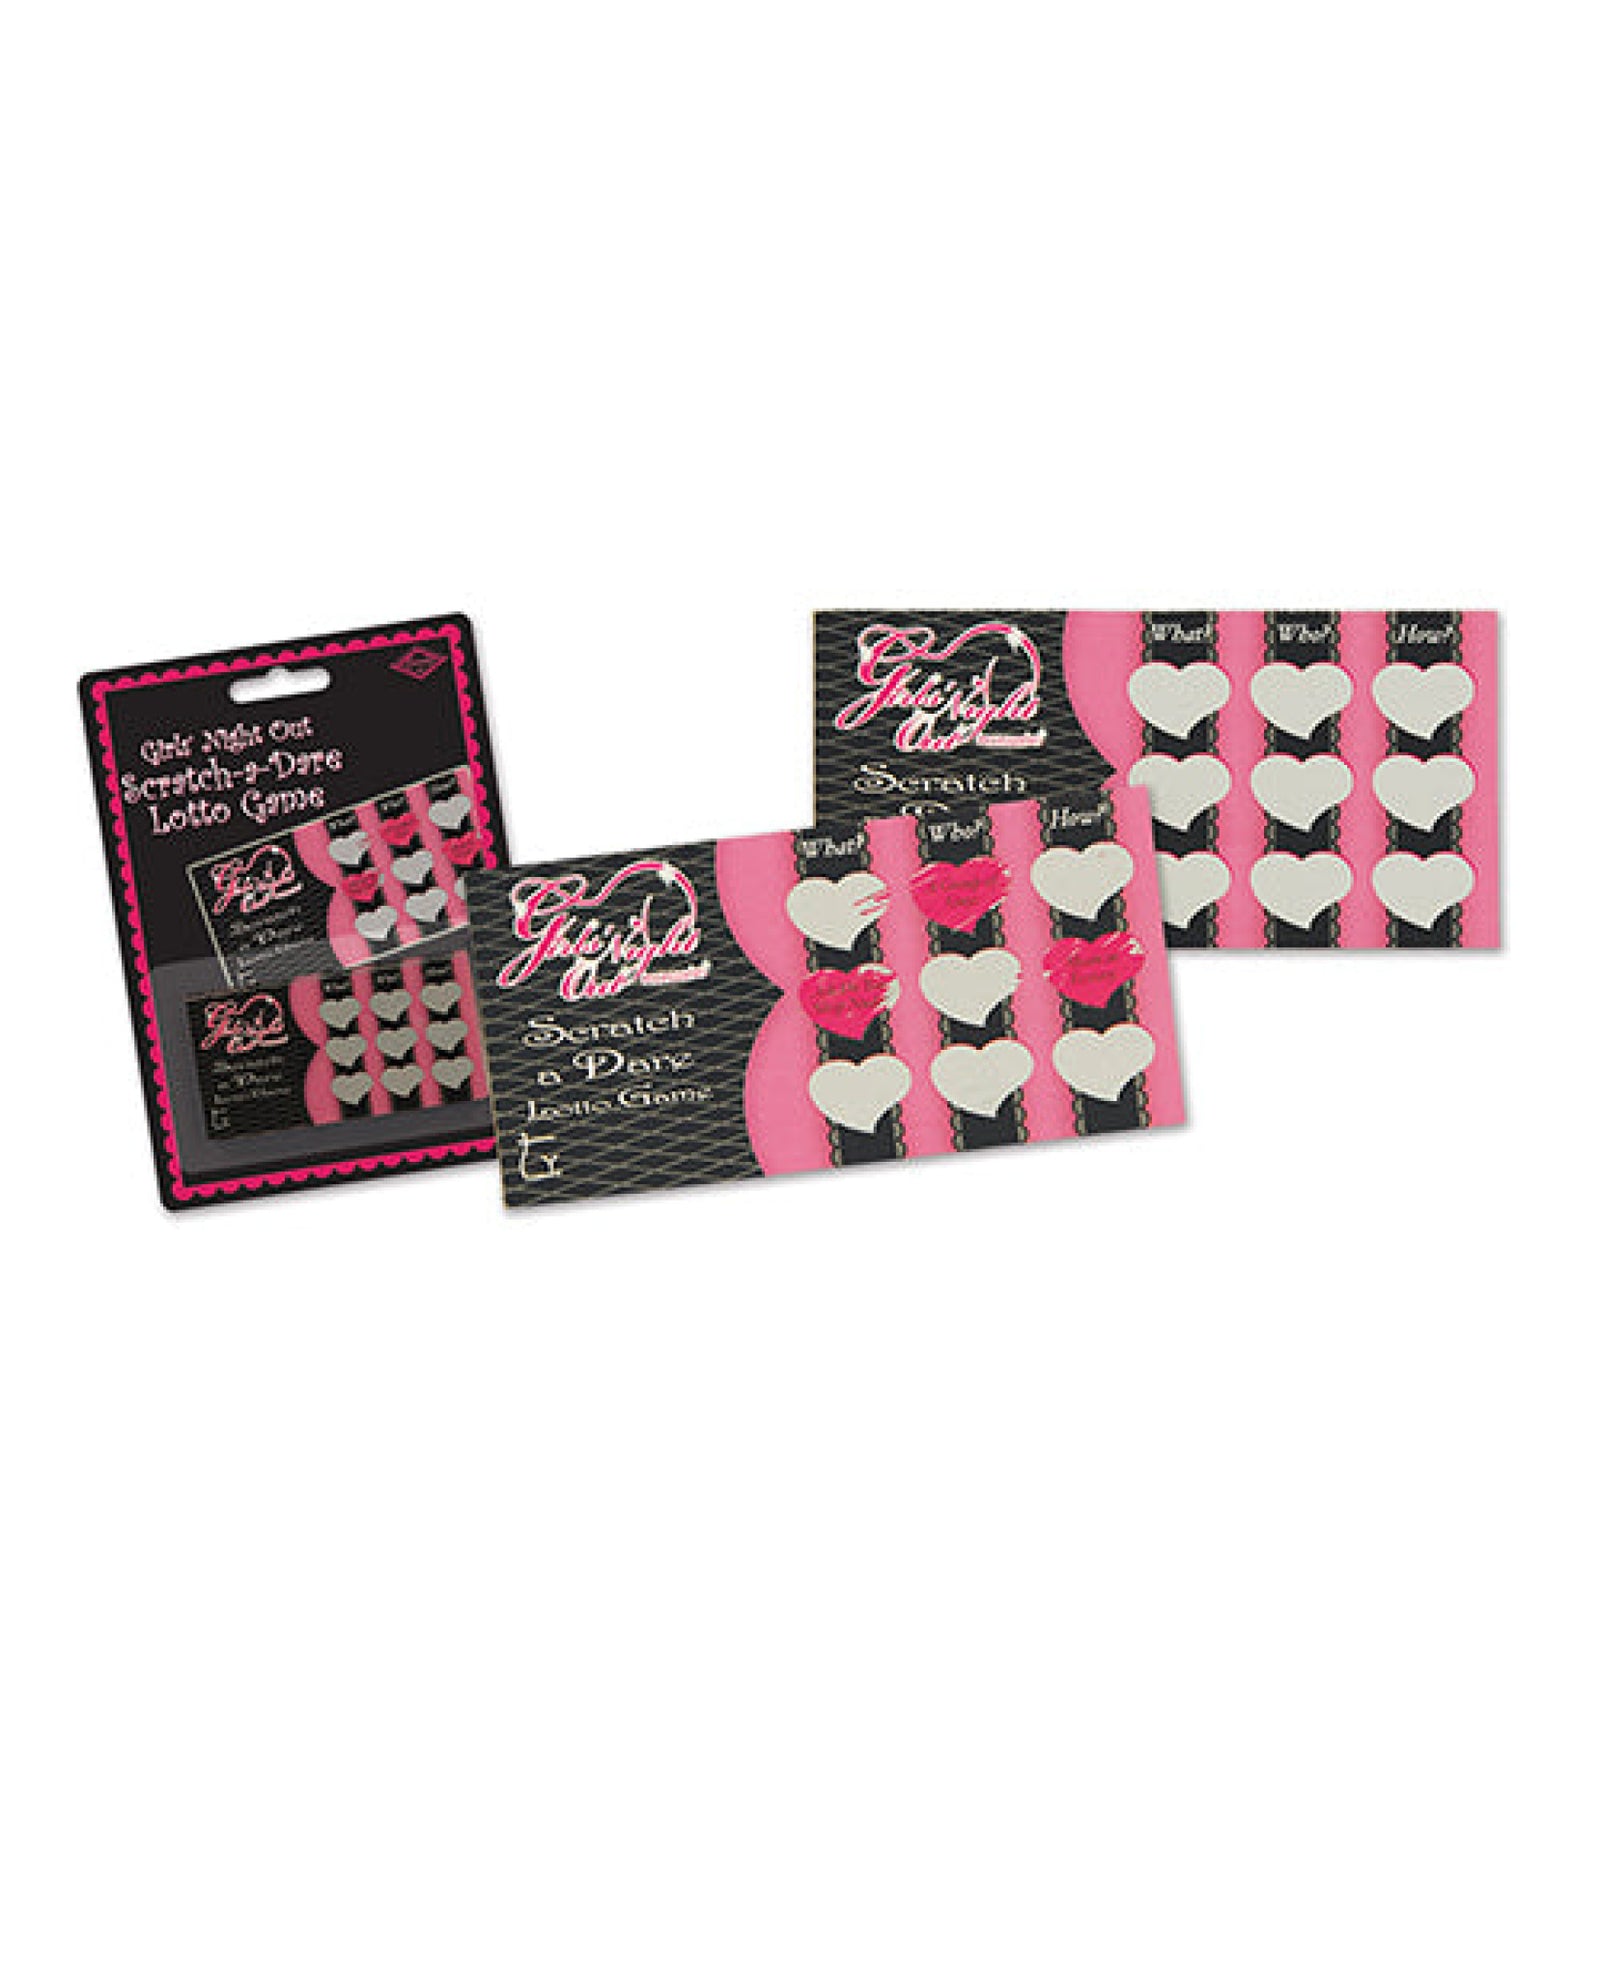 Girls' Night Out Scratch A Dare Lotto Game Beistle